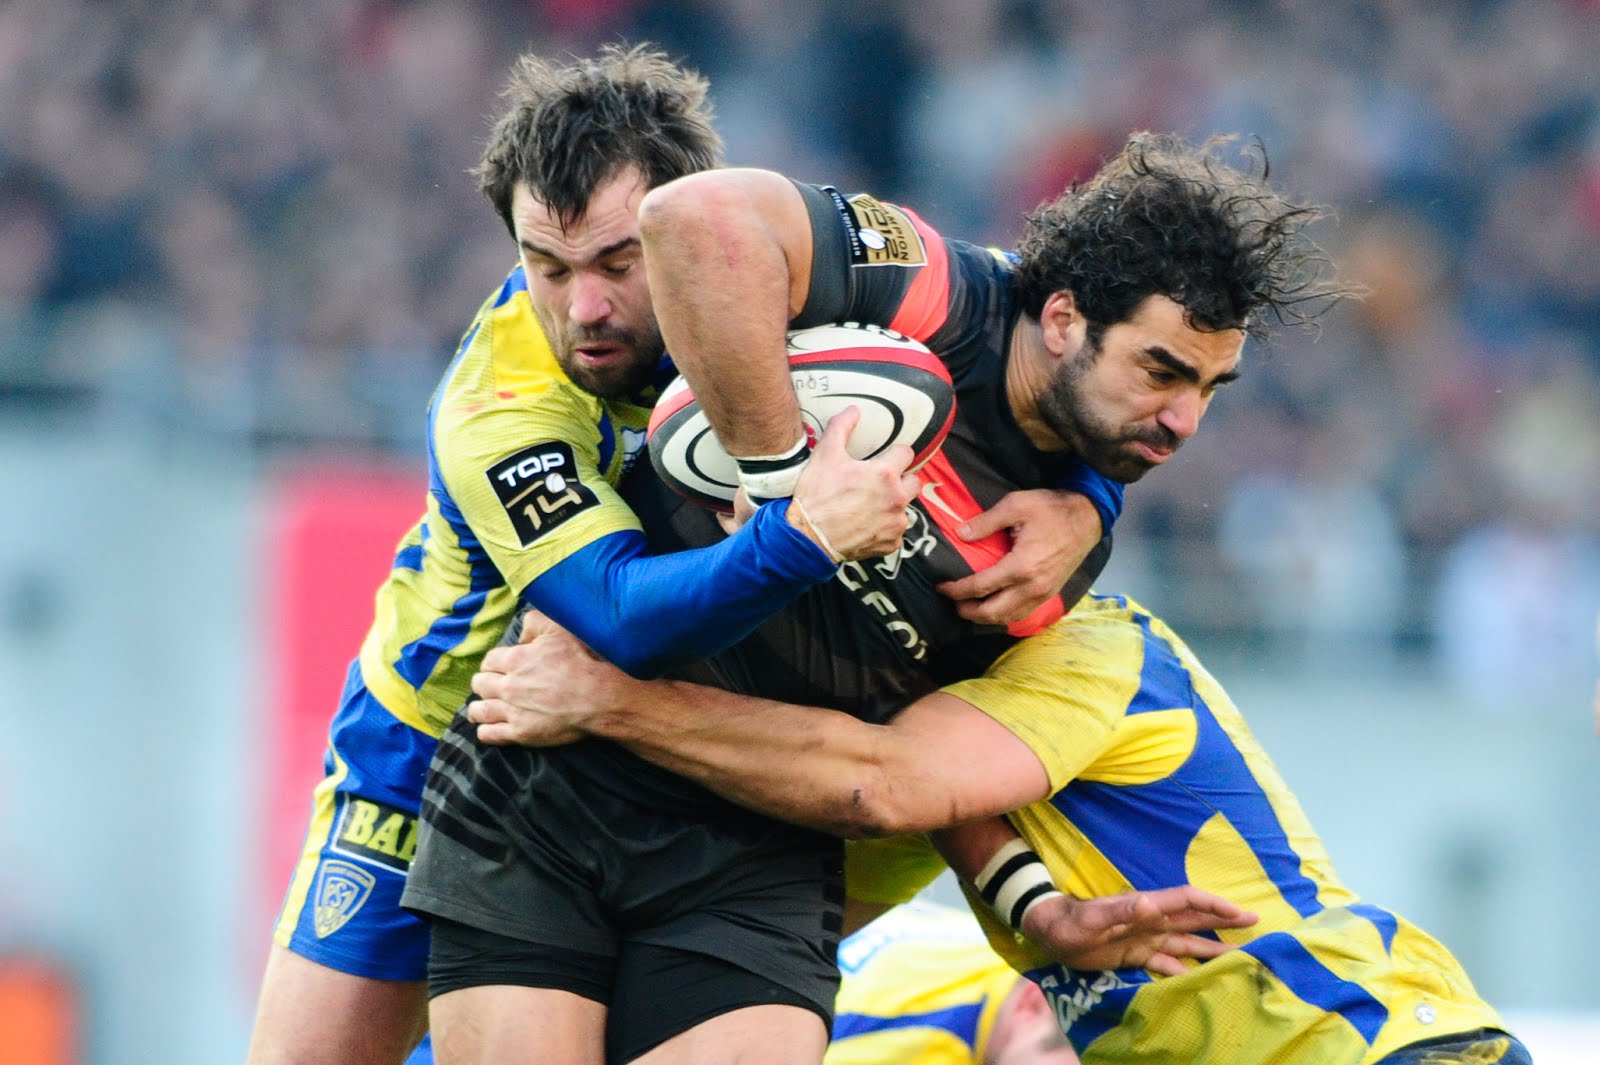 Match Rugby Stade Toulousain vs ASM Clermont en direct streaming live